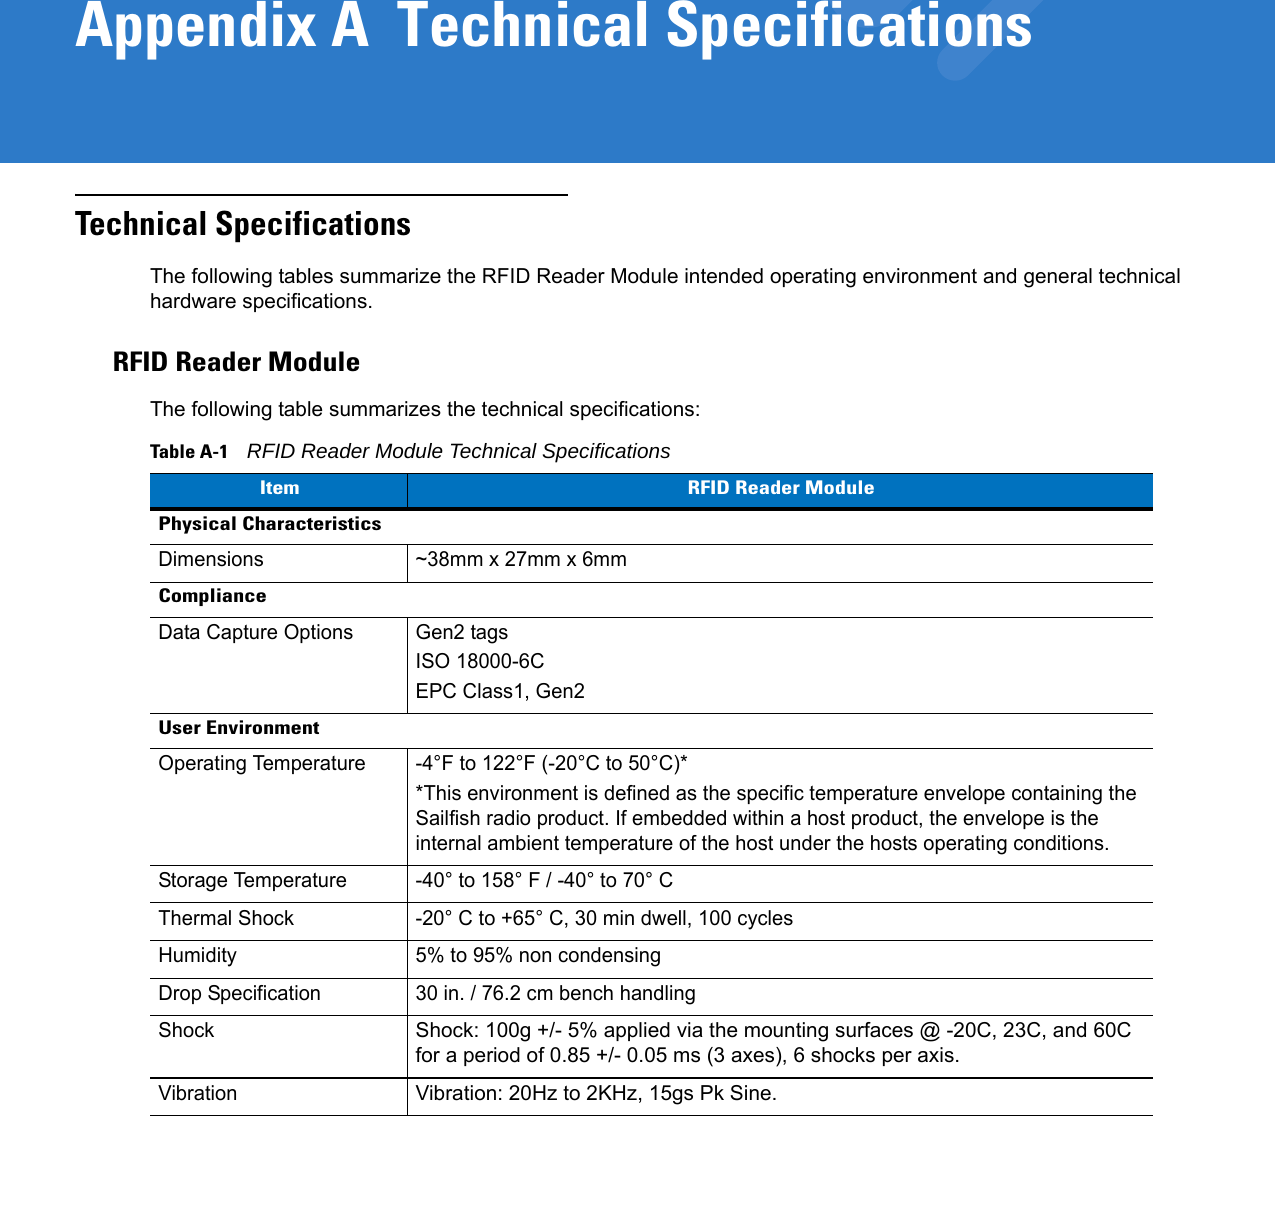 Appendix A  Technical SpecificationsTechnical SpecificationsThe following tables summarize the RFID Reader Module intended operating environment and general technical hardware specifications.RFID Reader ModuleThe following table summarizes the technical specifications:Table A-1    RFID Reader Module Technical SpecificationsItem RFID Reader ModulePhysical CharacteristicsDimensions  ~38mm x 27mm x 6mmComplianceData Capture Options Gen2 tagsISO 18000-6CEPC Class1, Gen2User EnvironmentOperating Temperature -4°F to 122°F (-20°C to 50°C)**This environment is defined as the specific temperature envelope containing the Sailfish radio product. If embedded within a host product, the envelope is the internal ambient temperature of the host under the hosts operating conditions.Storage Temperature -40° to 158° F / -40° to 70° C Thermal Shock -20° C to +65° C, 30 min dwell, 100 cyclesHumidity 5% to 95% non condensingDrop Specification 30 in. / 76.2 cm bench handlingShockShock: 100g +/- 5% applied via the mounting surfaces @ -20C, 23C, and 60C for a period of 0.85 +/- 0.05 ms (3 axes), 6 shocks per axis.VibrationVibration: 20Hz to 2KHz, 15gs Pk Sine.